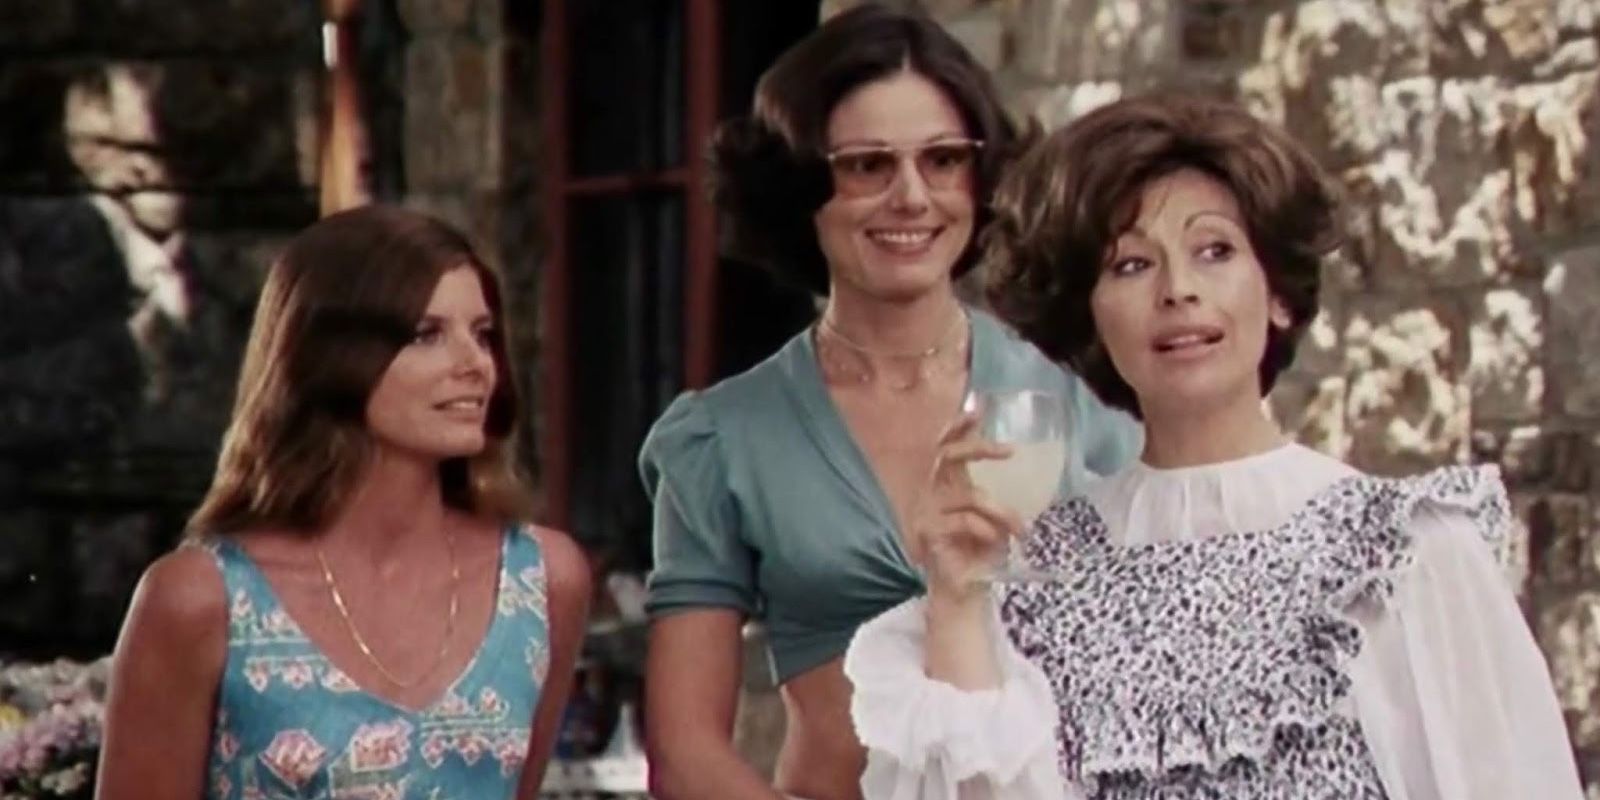 The Stepford wives drinking at a party